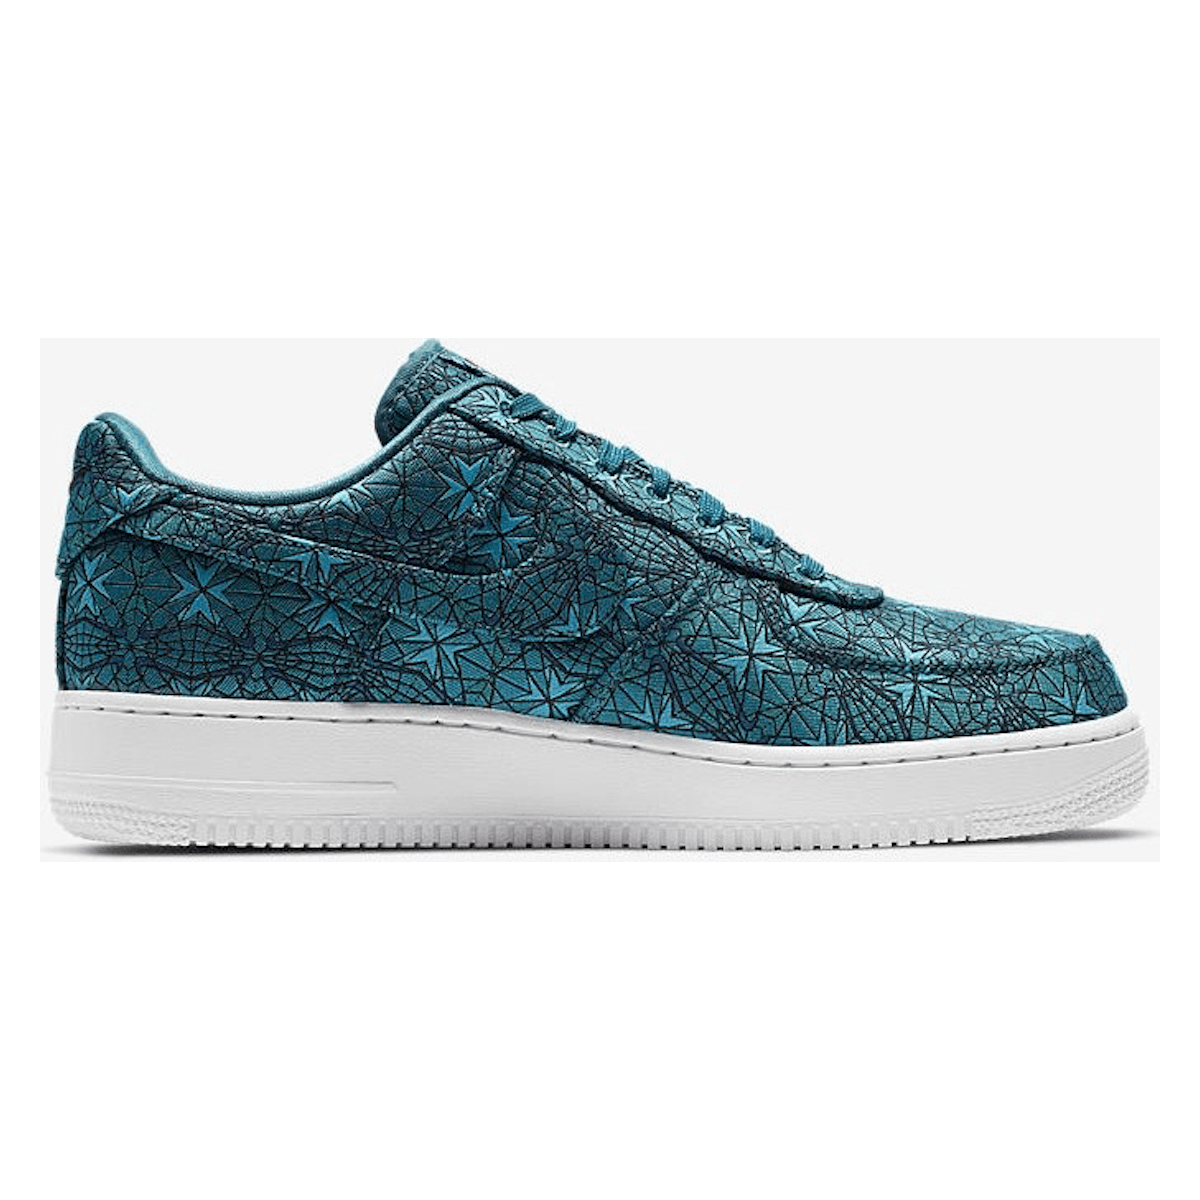 Nike Air Force 1 '07 Low Premium "Green Abyss"